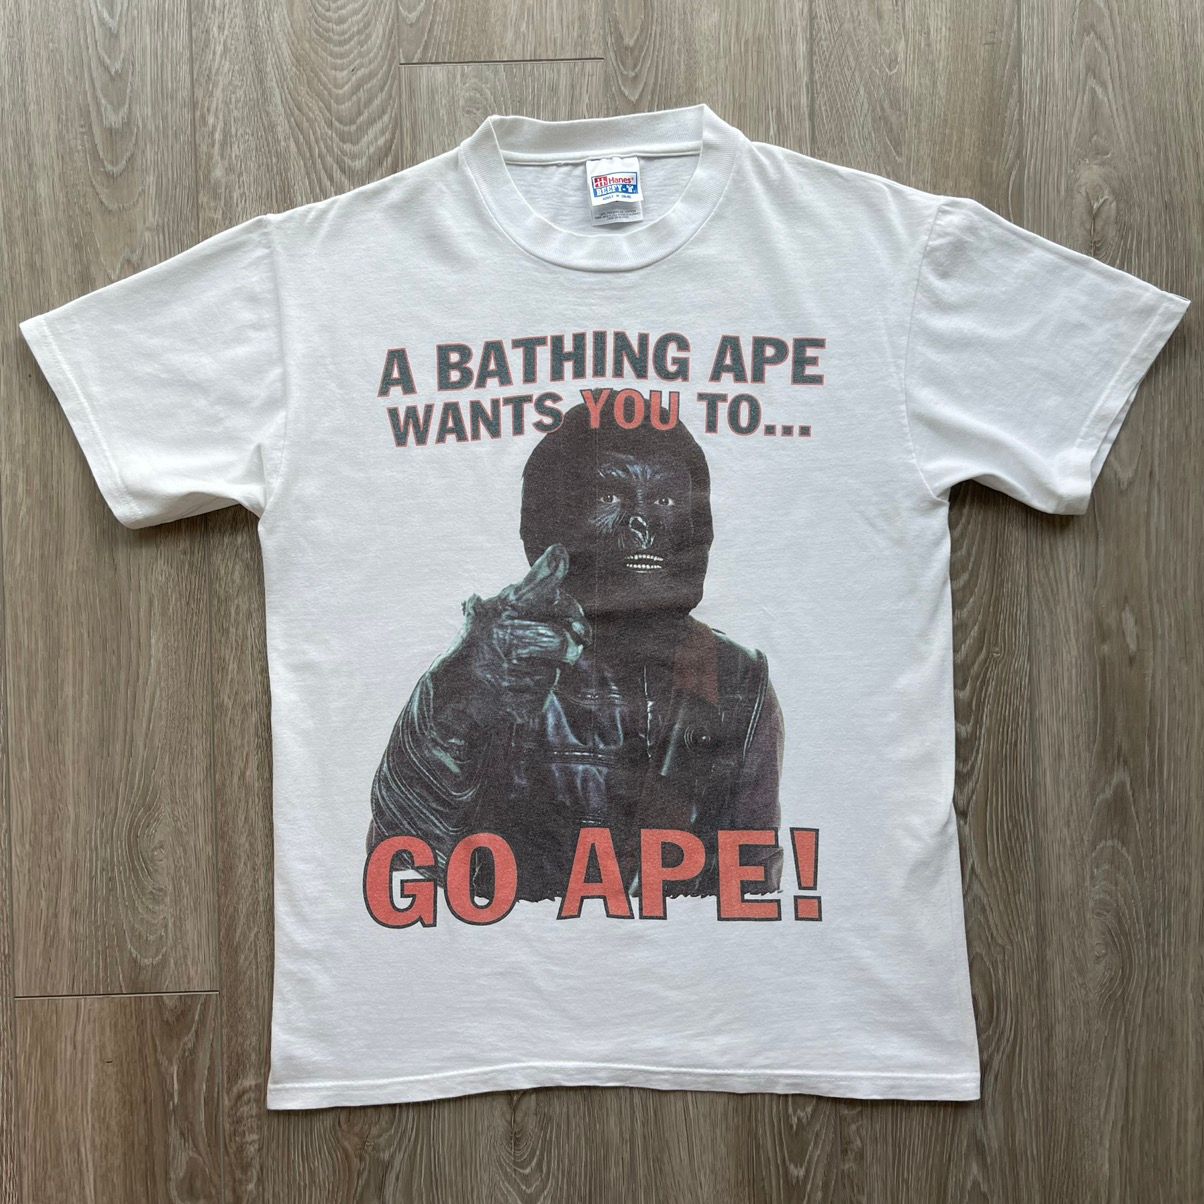 Pre-owned Bape Og  Wants You To Go Ape Tee Shirt 90's Planet Vintage M In White